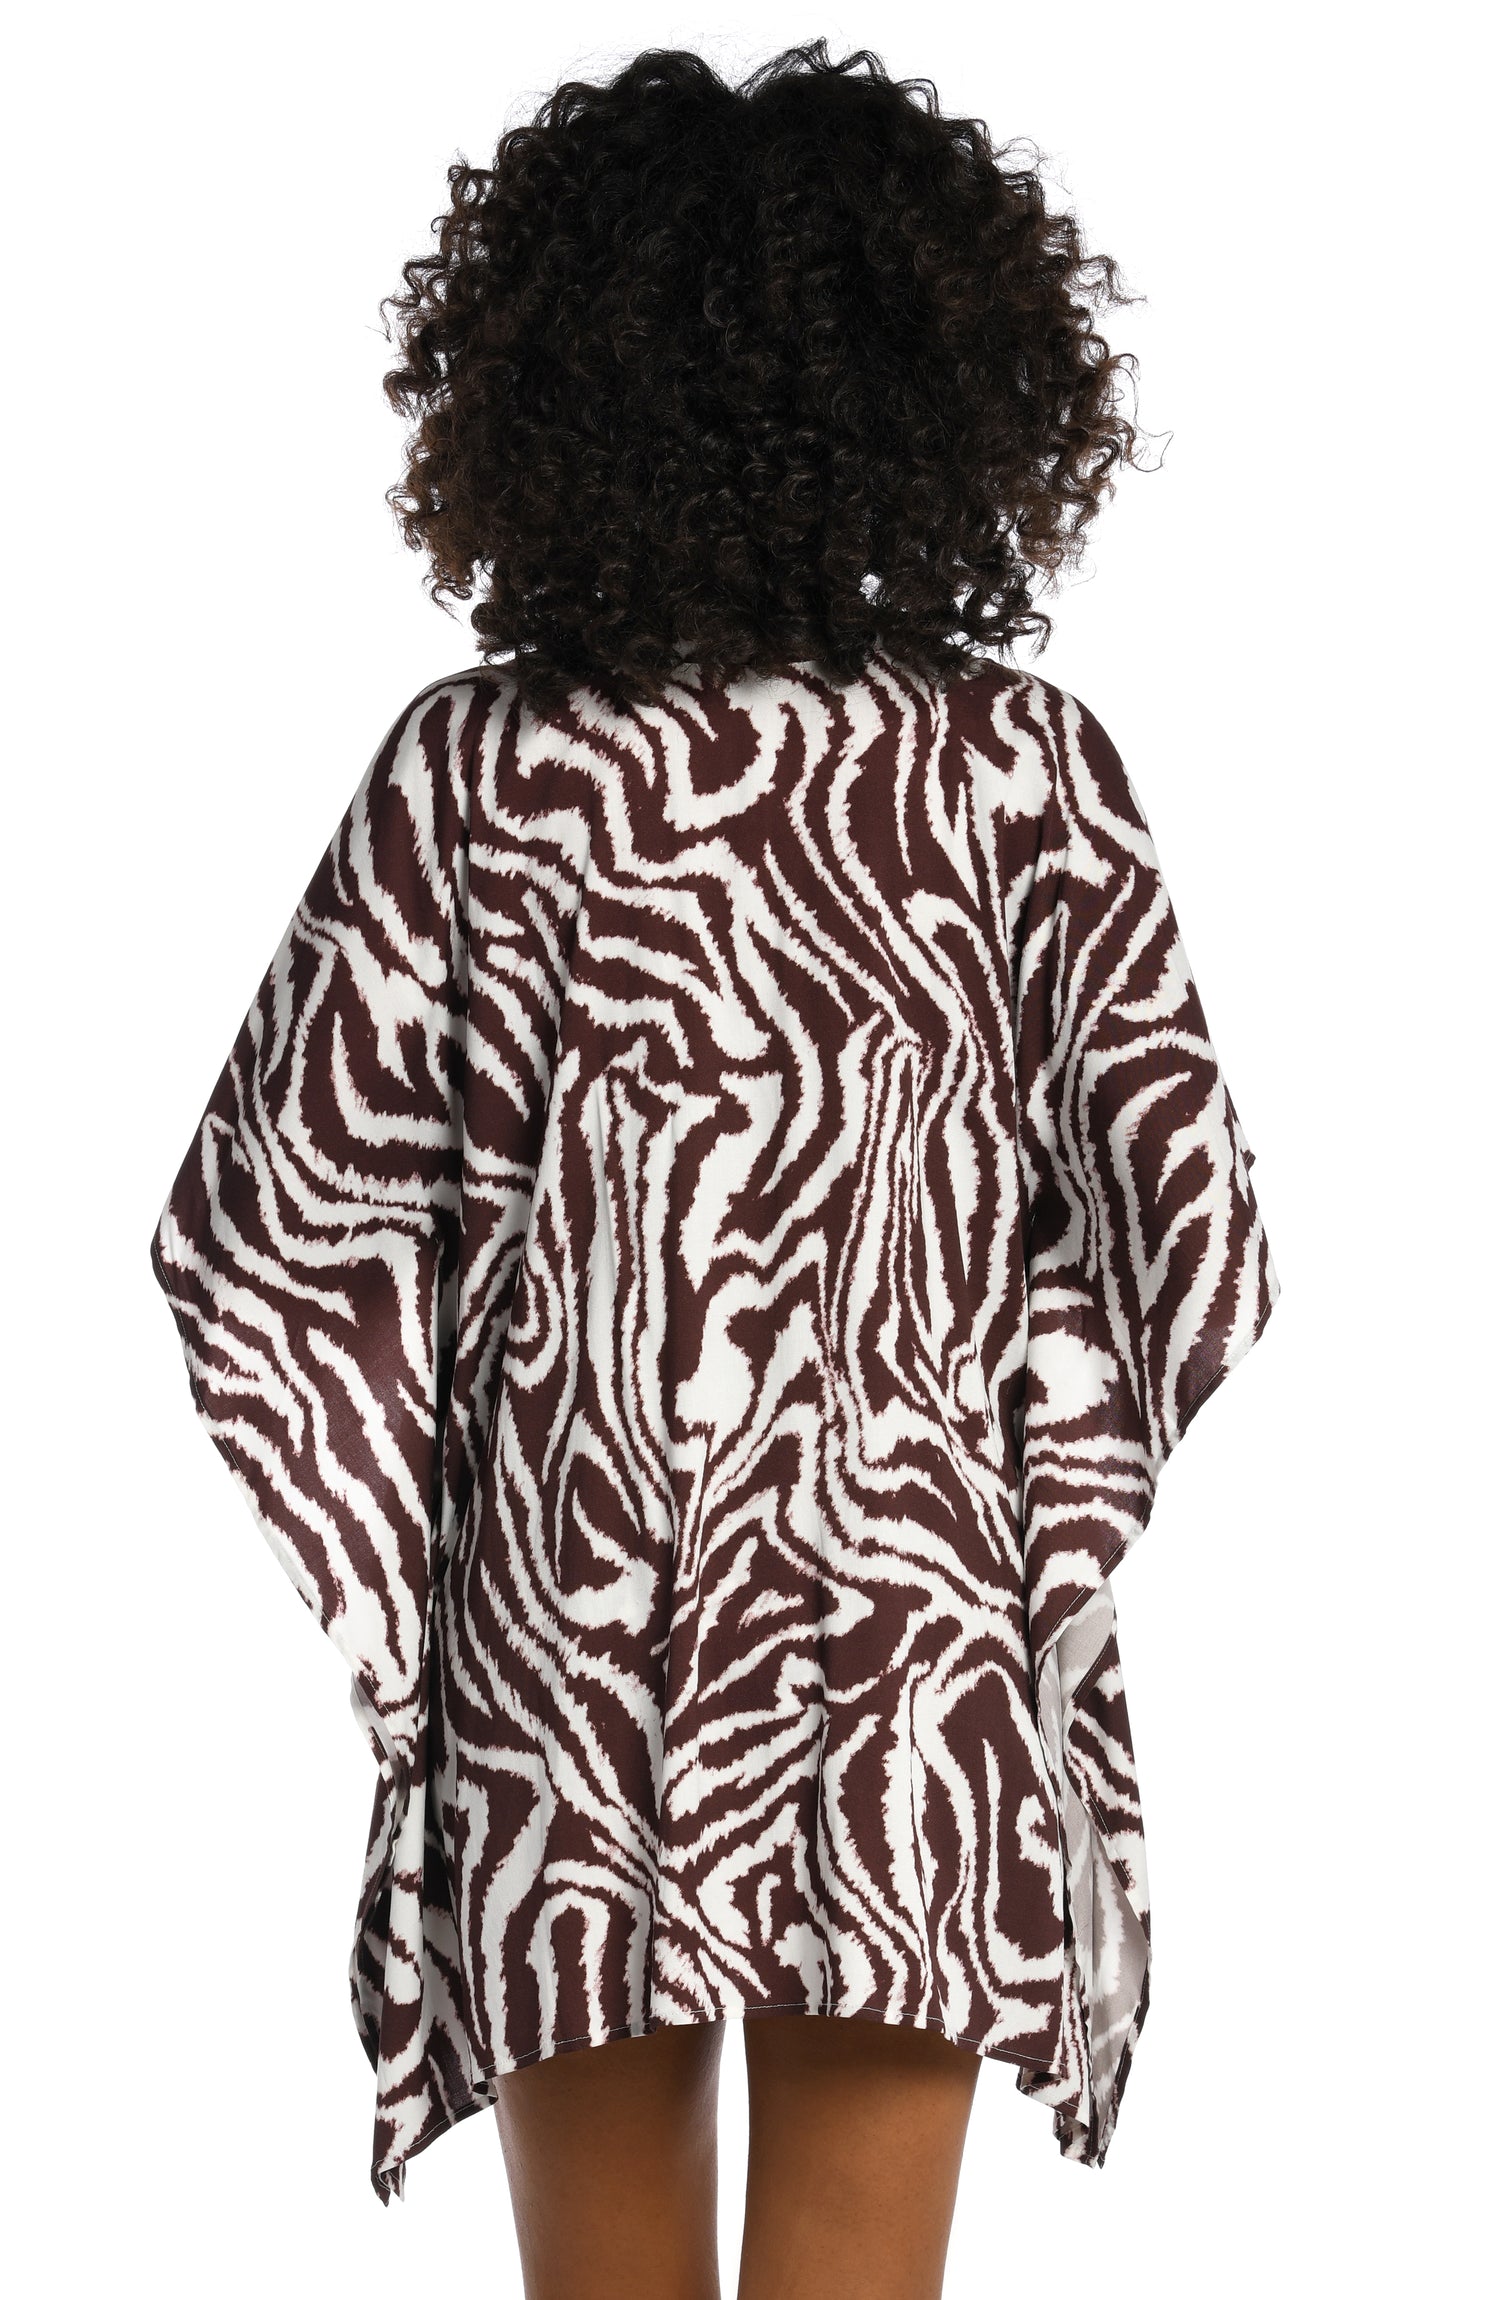 Model is wearing a java colored animal printed v-neck caftan wrap cover up in our Fierce Lines collection!